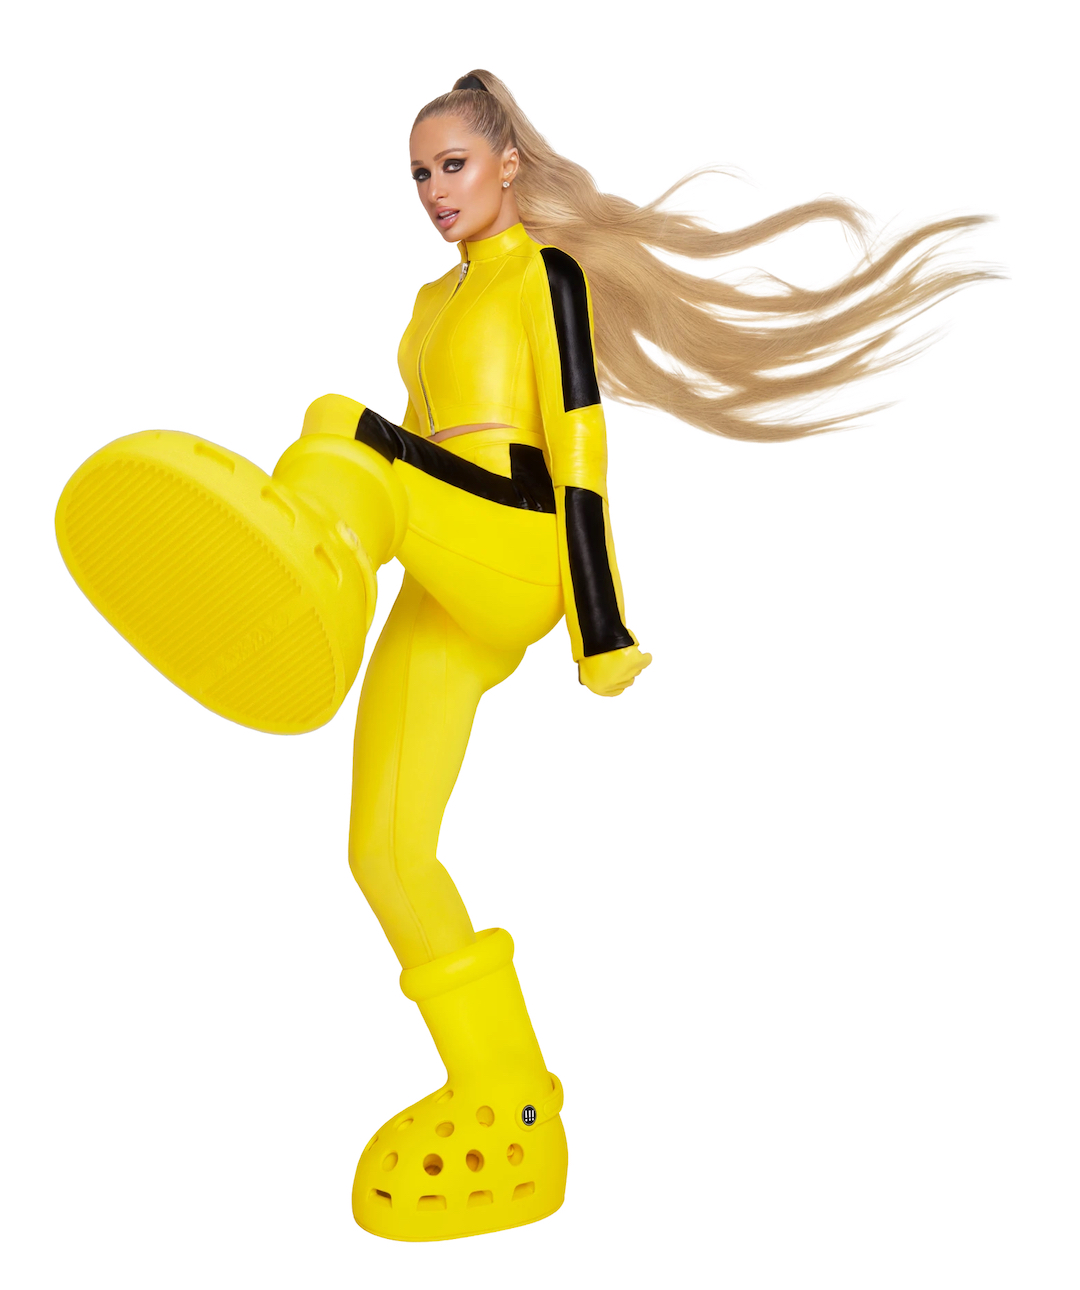 MSCHF’s Giant Yellow Crocs-Boots Will Set You Back An Equally Tall Wad ...